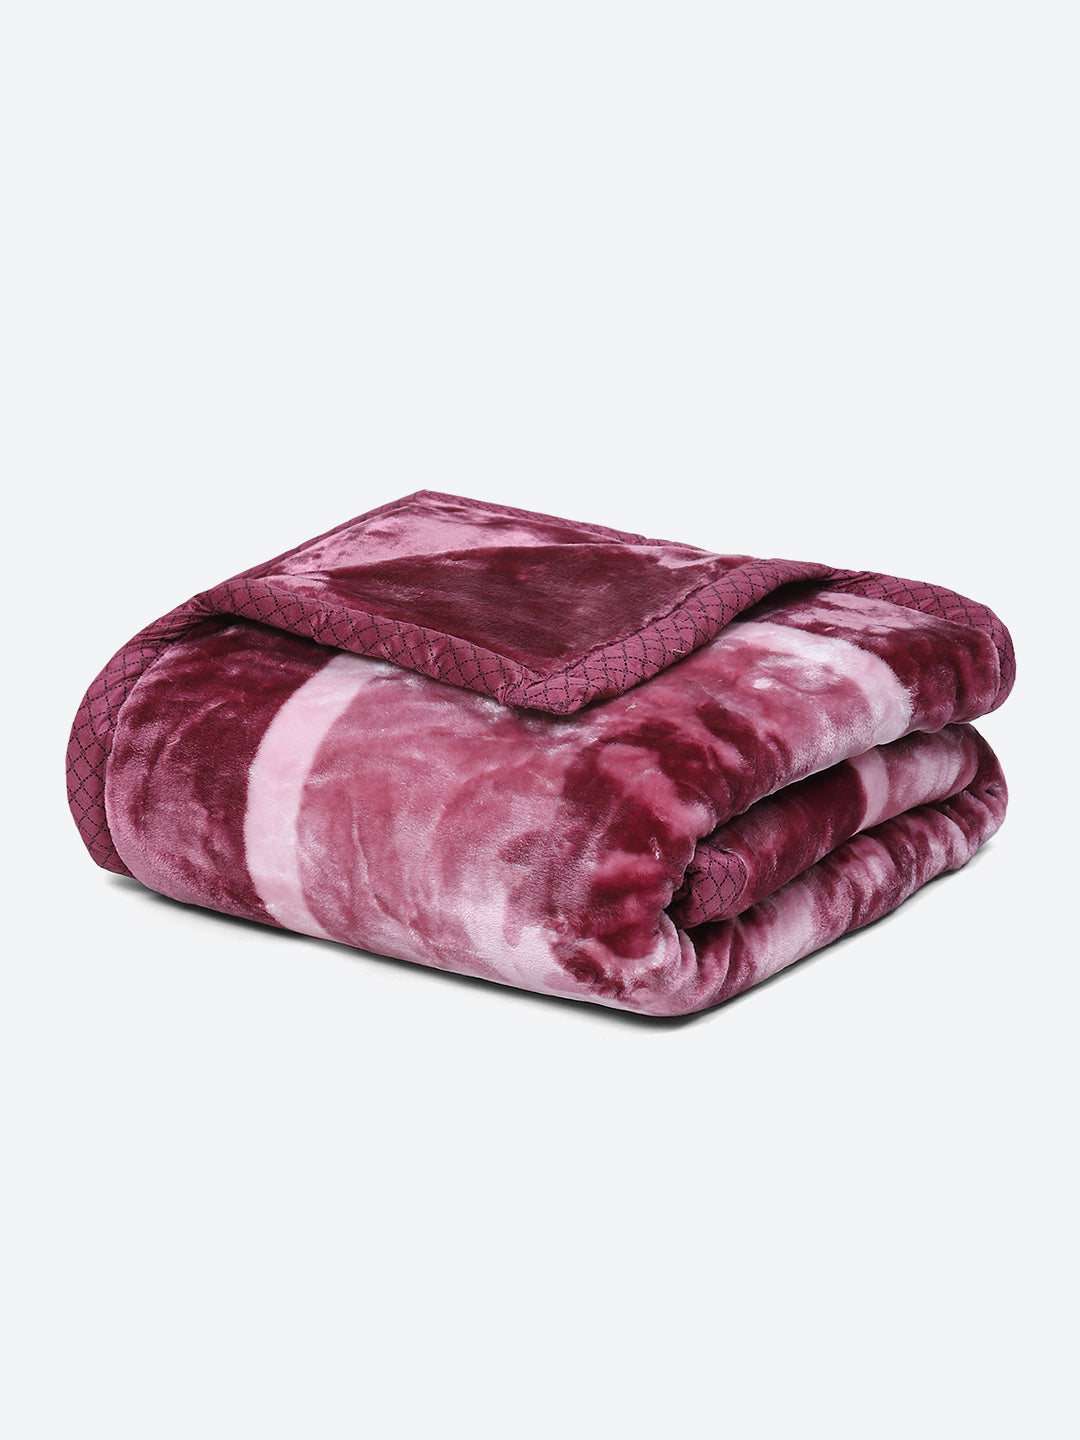 Printed Single Bed Blanket for Mild Winter -2 Ply